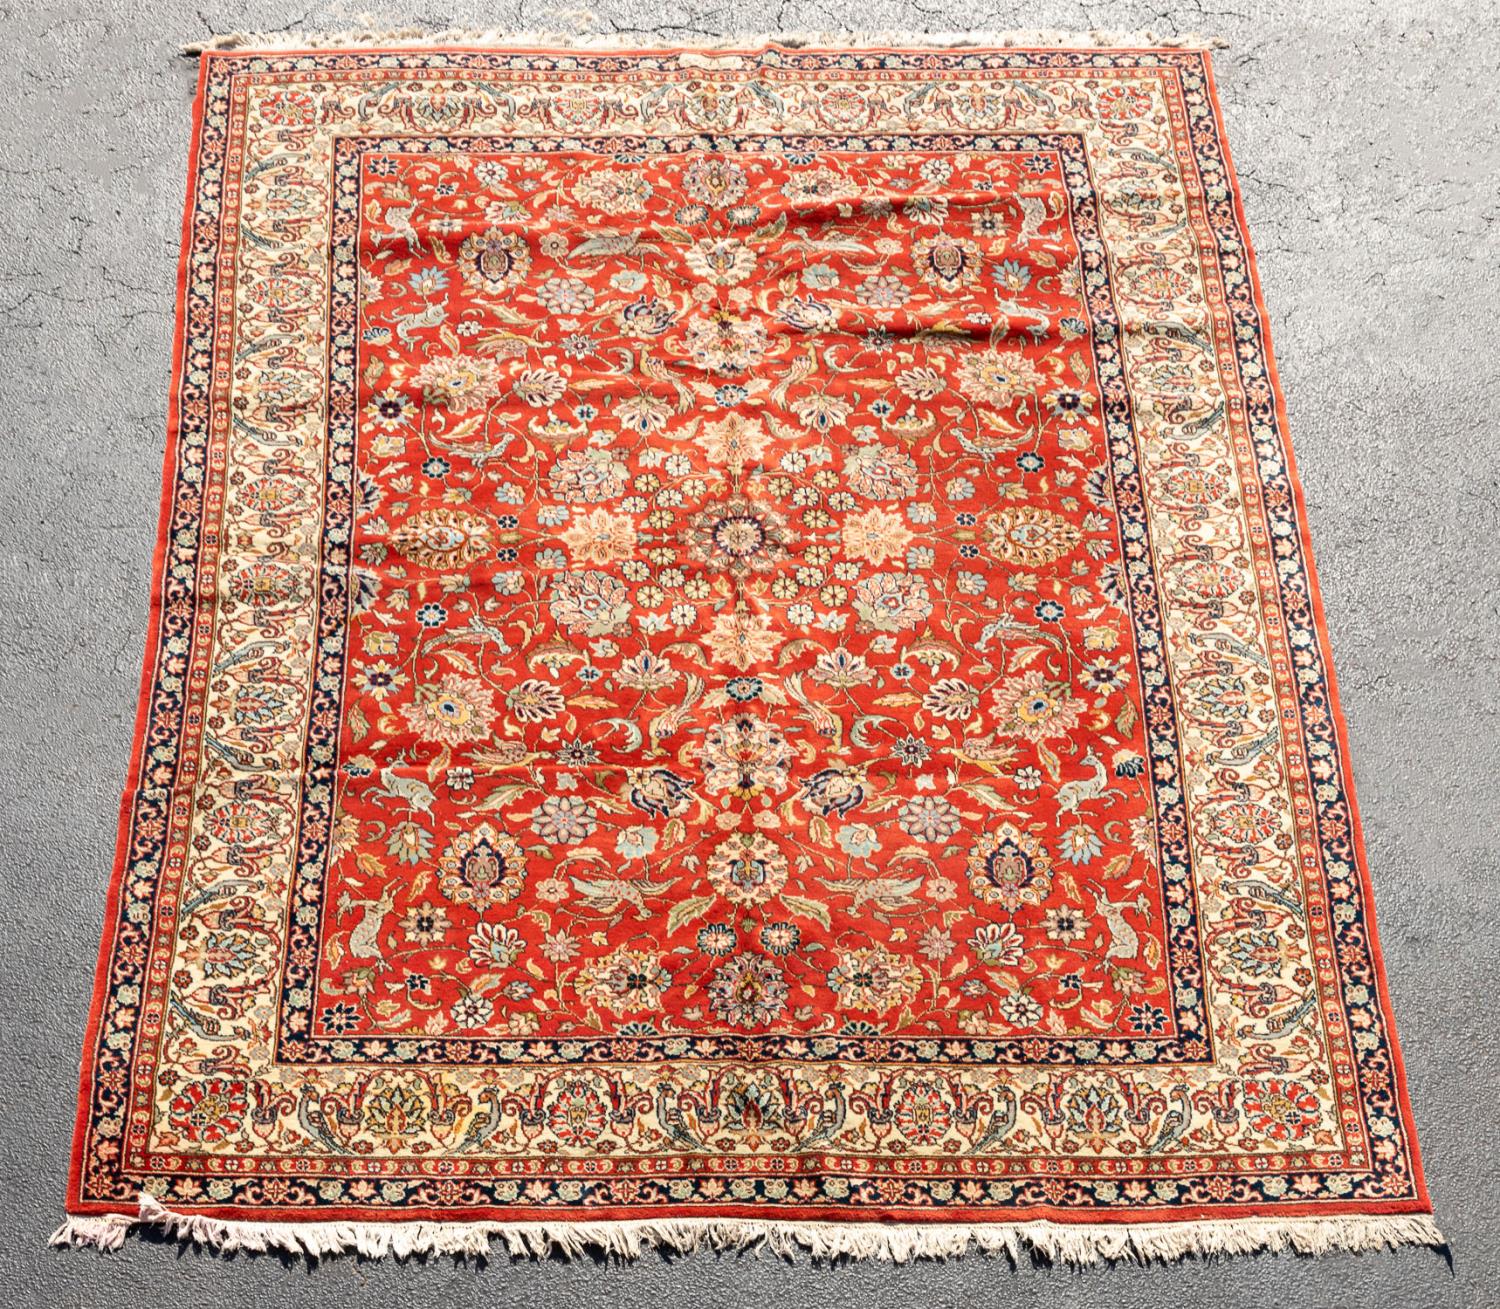 HAND KNOTTED WOOL TABRIZ RUG, 12